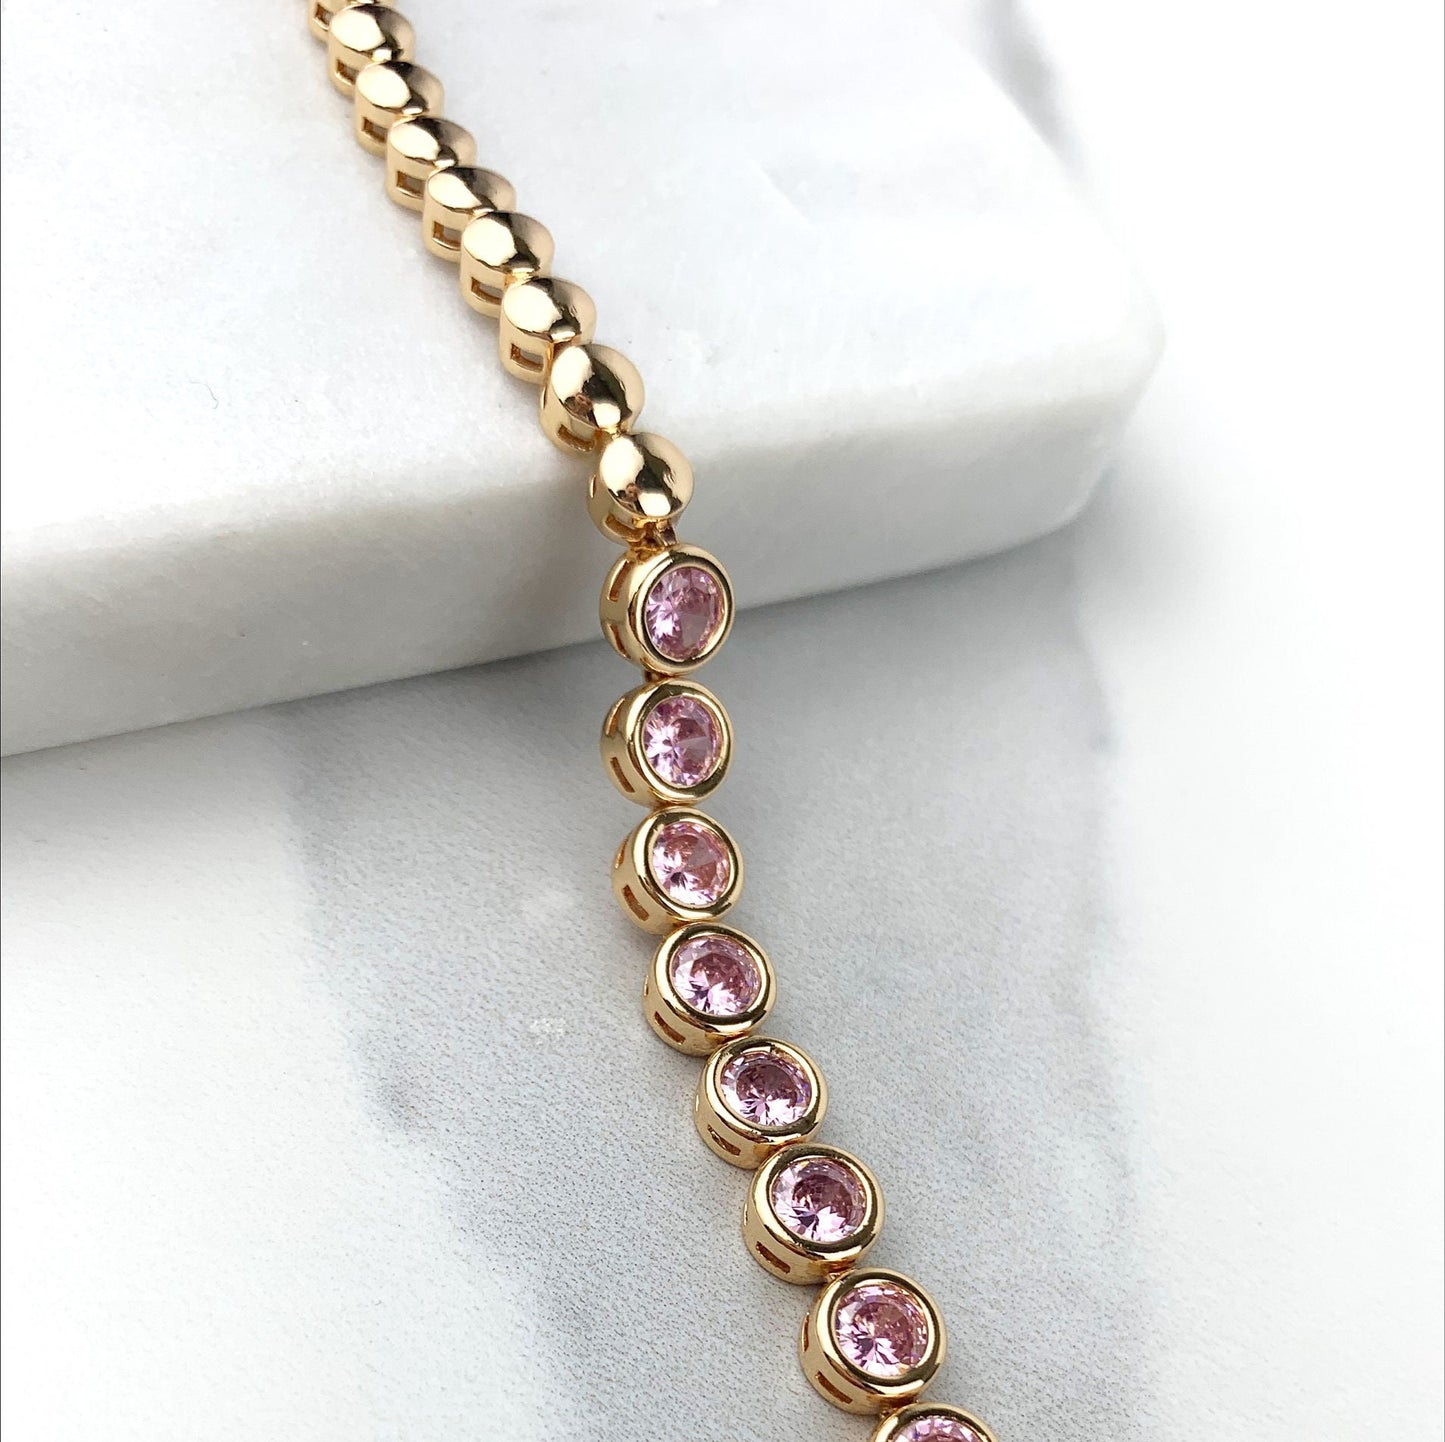 18k Rose Gold Filled Bracelet Featuring Pink or Clear Zirconia, Heart or Circle Shape, Wholesale Jewelry Supplies